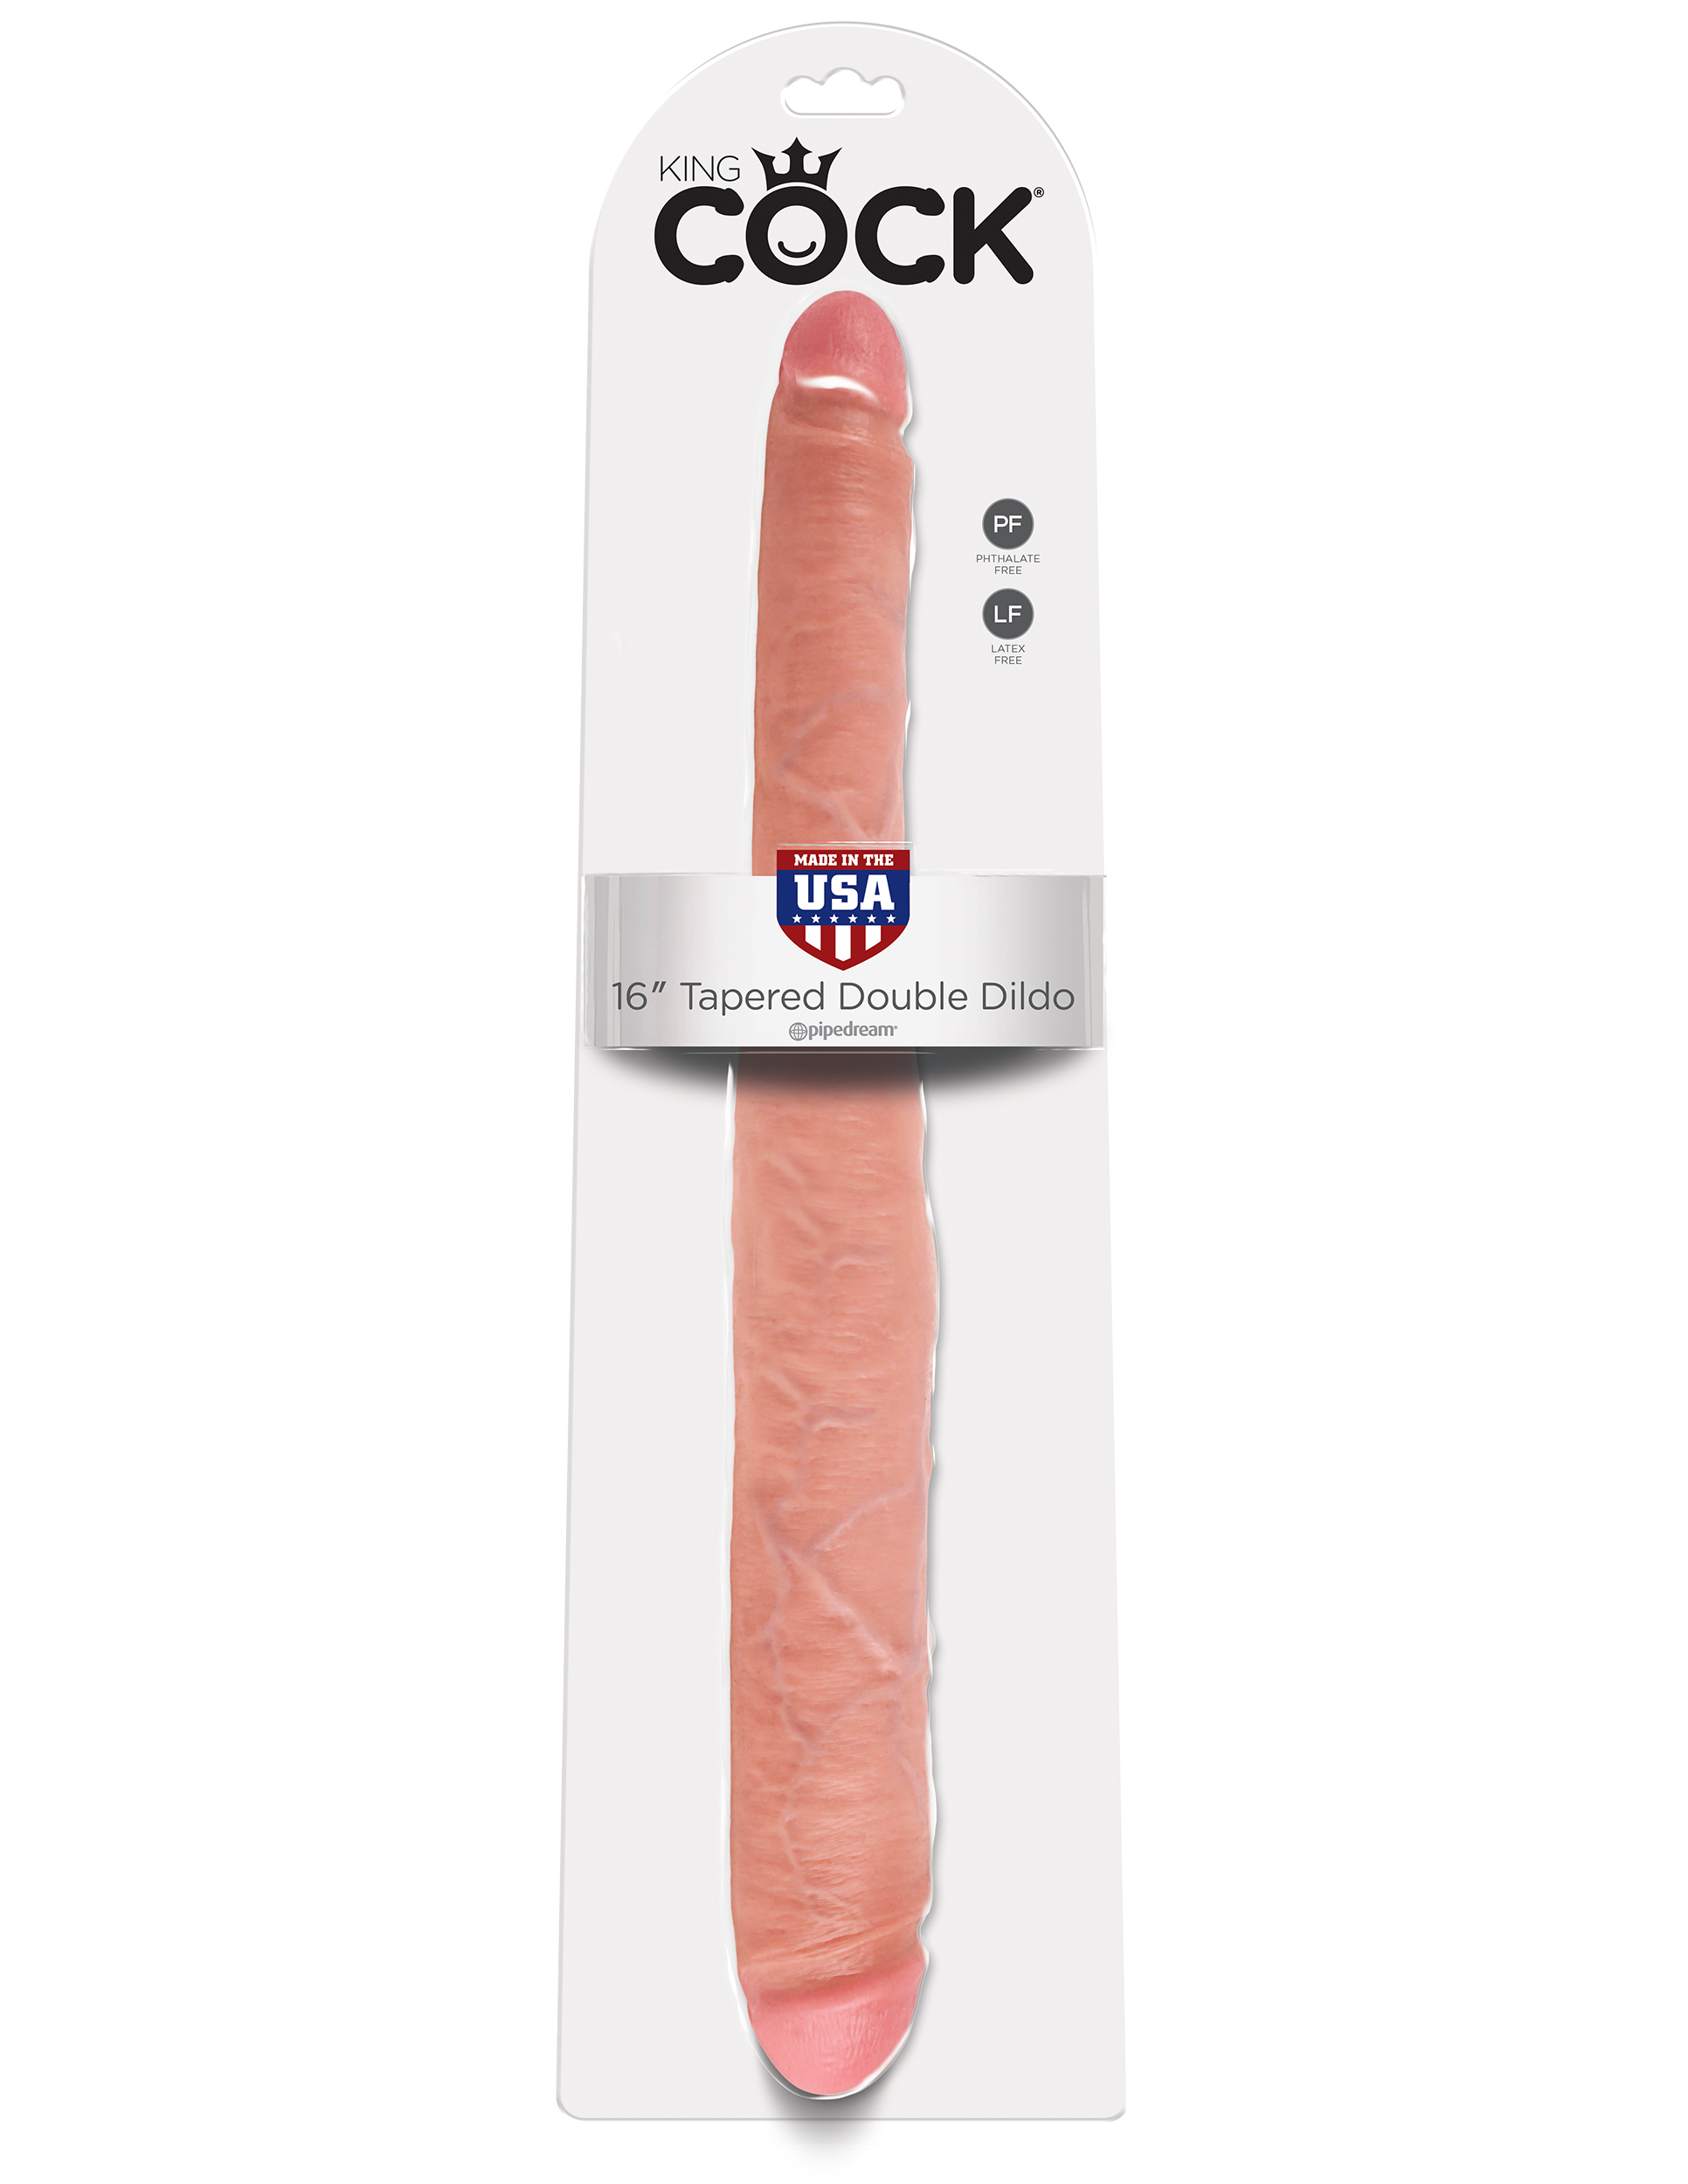   King Cock 16» Tapered Double Dildo, 404,3 